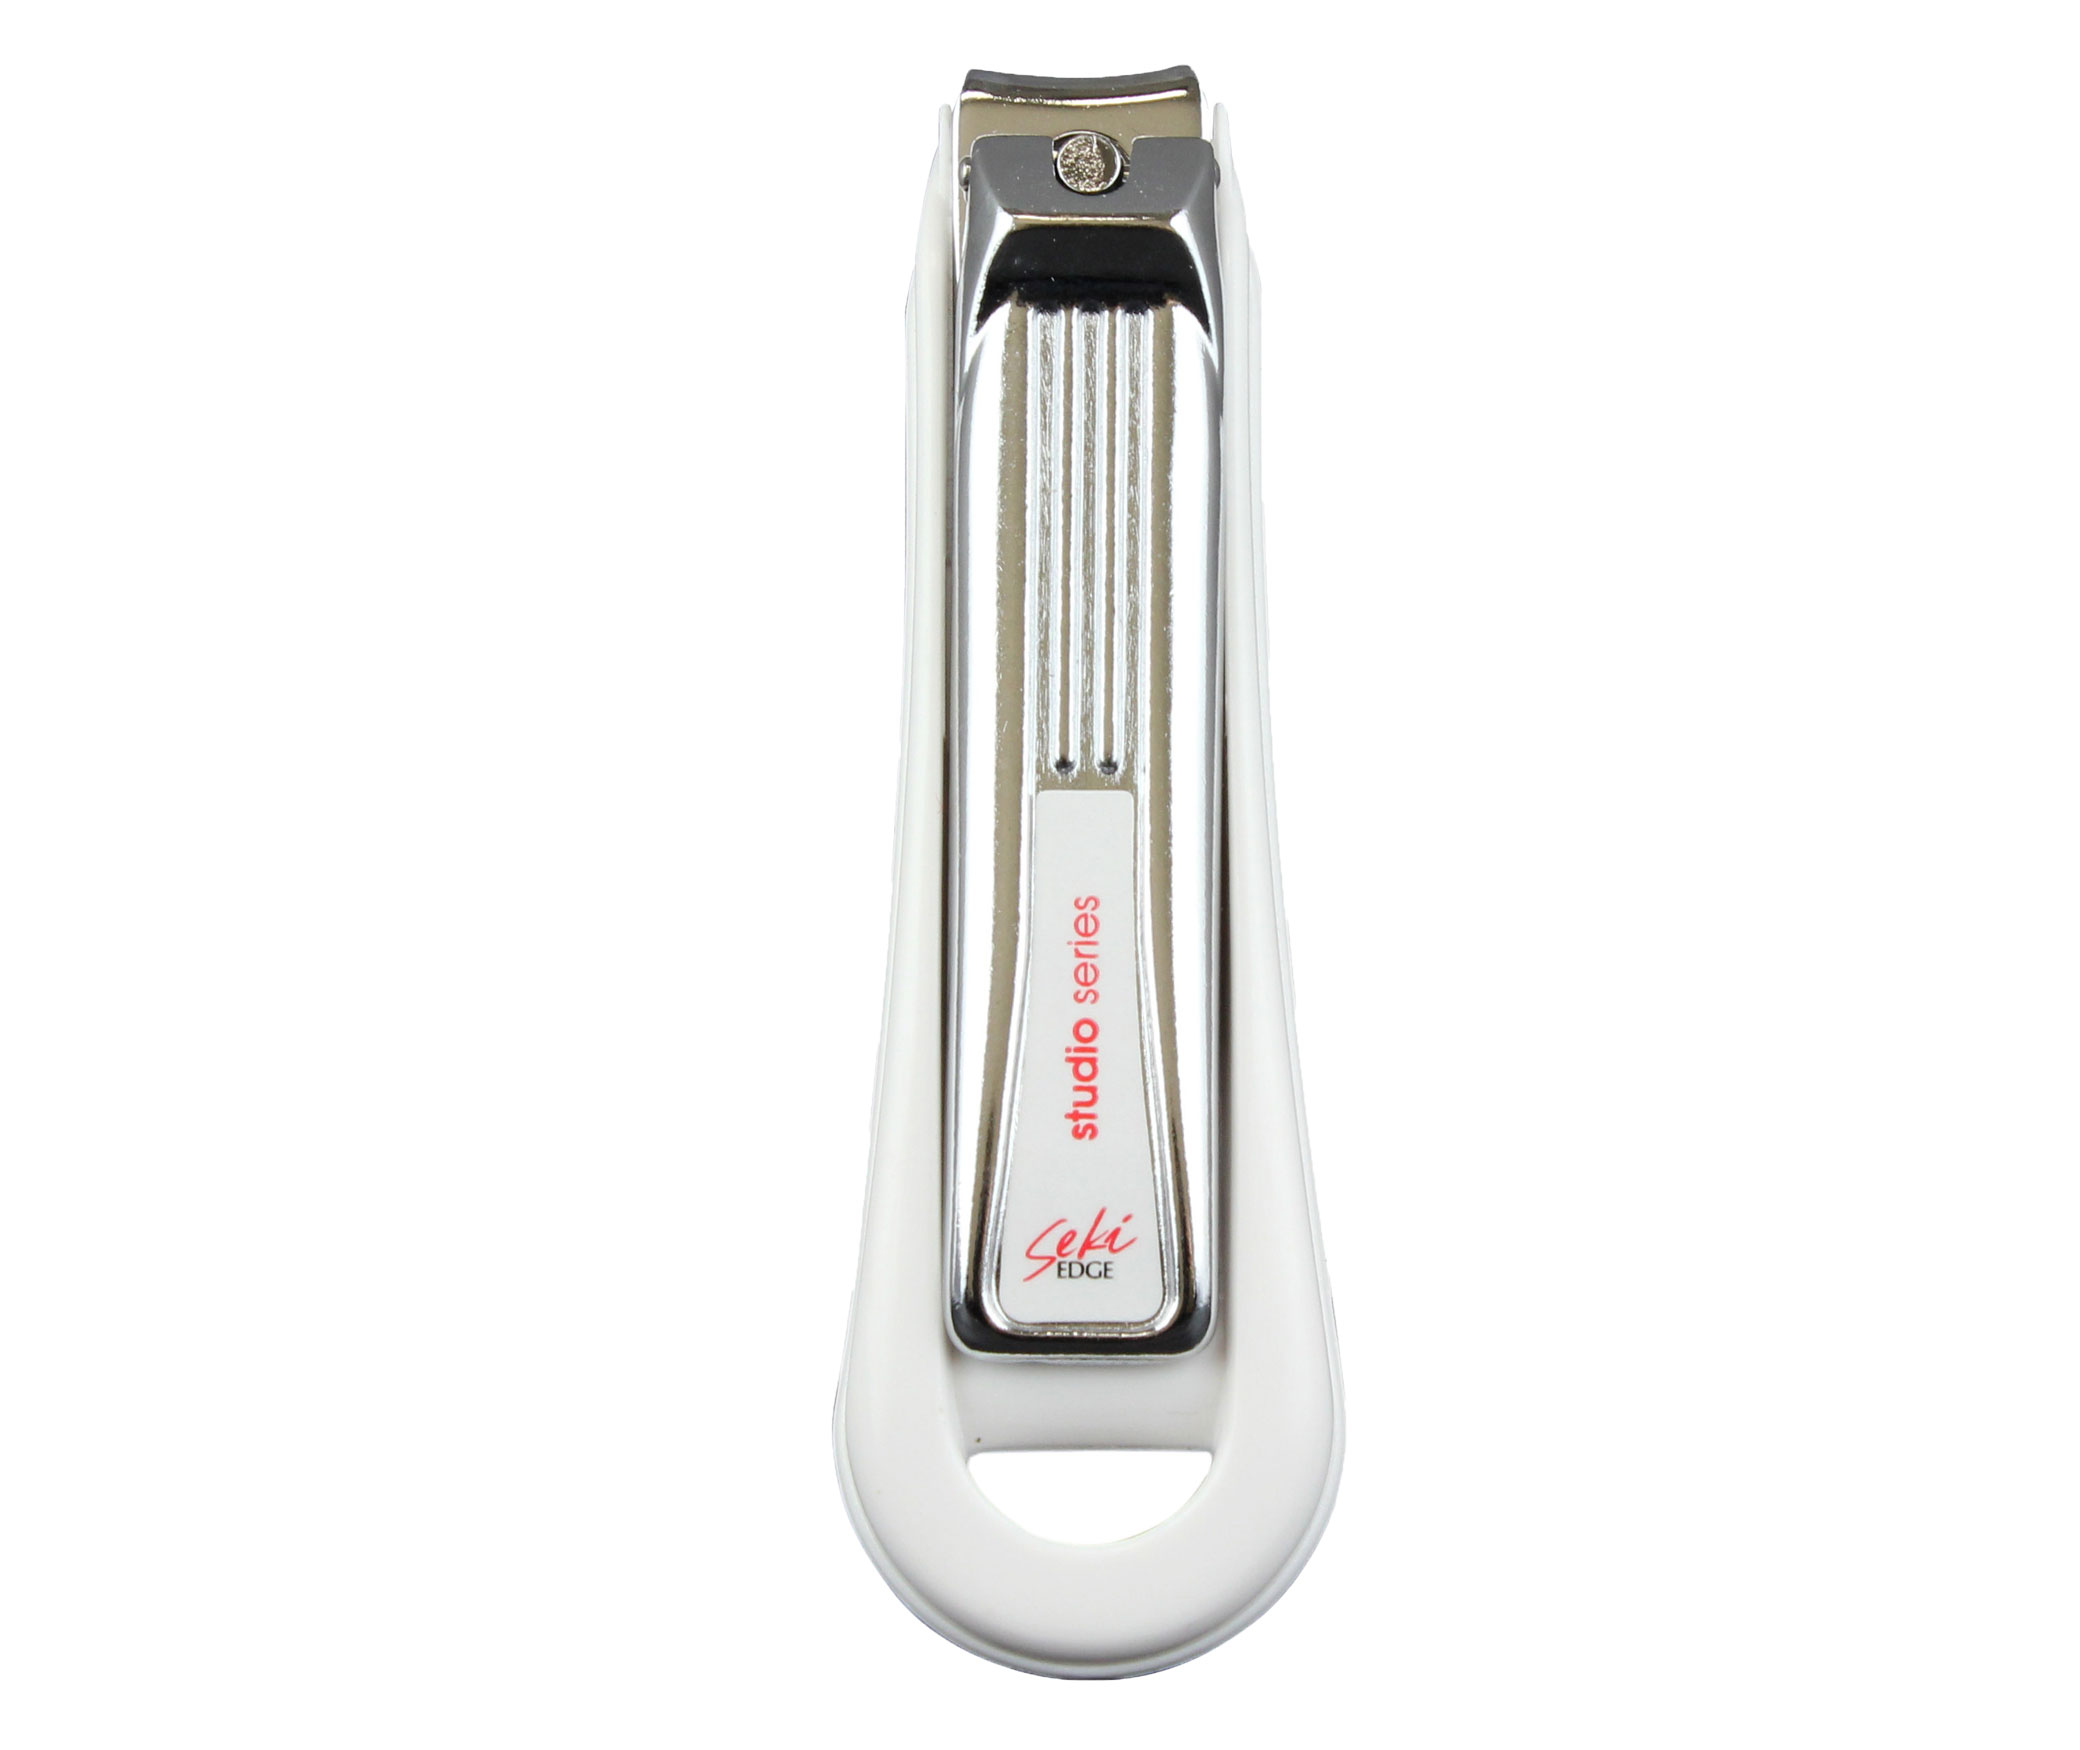 Professional Stainless Steel Toe Clippers (Straight Edge